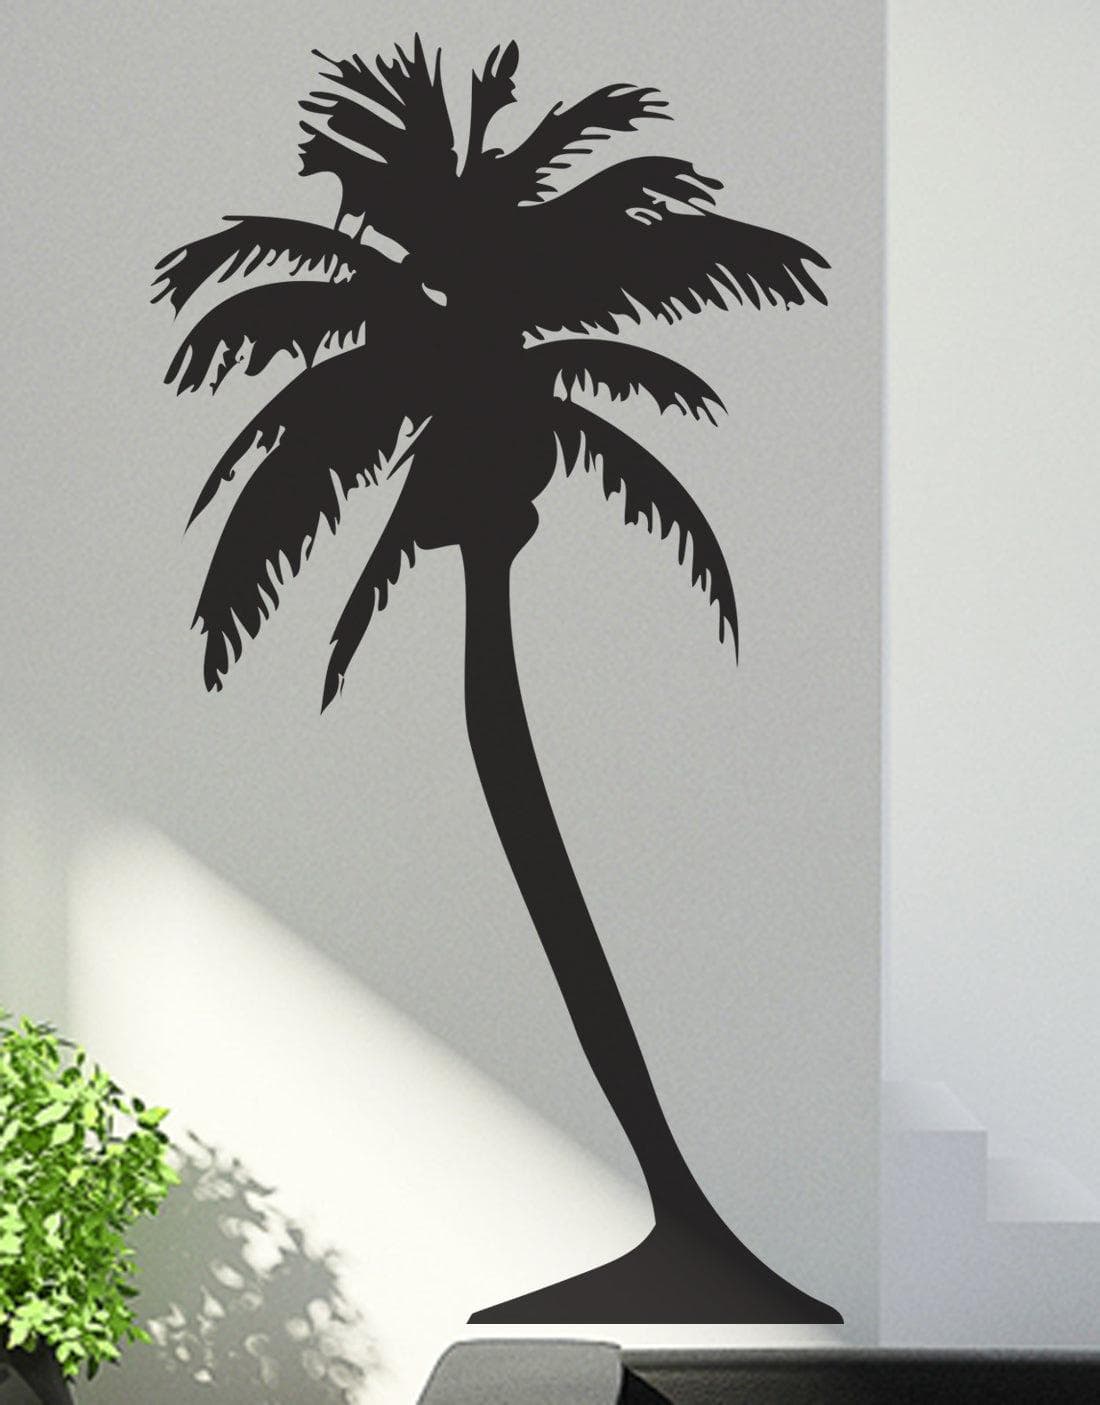 Black palm tree decals on a white wall.